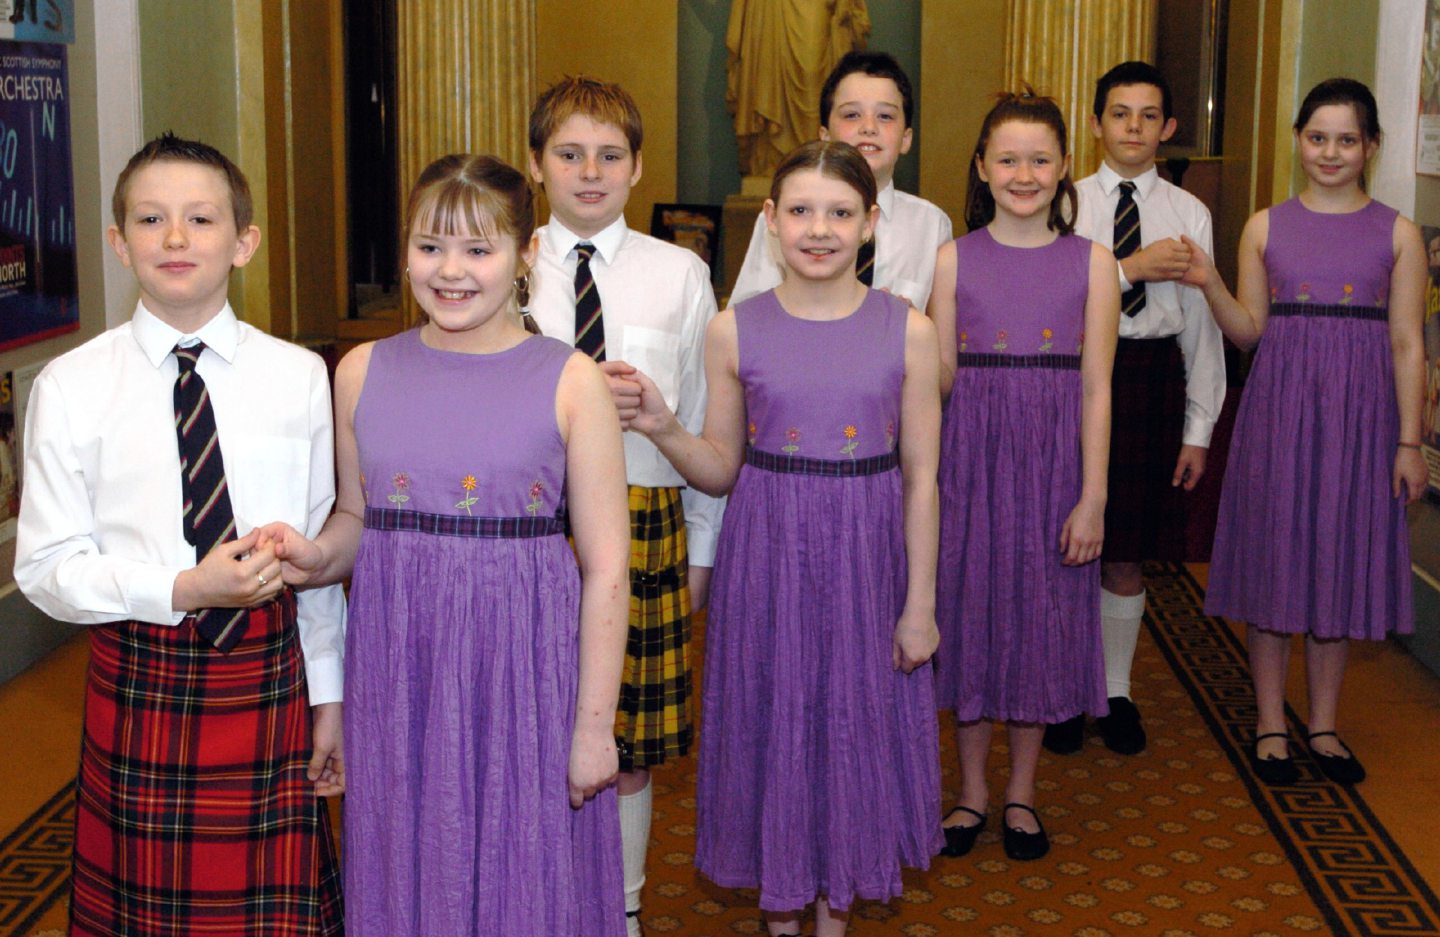 Smart Walker Road pupils reading to compete in a Scottish Country Dance music festival at the Music Hall in 2004.